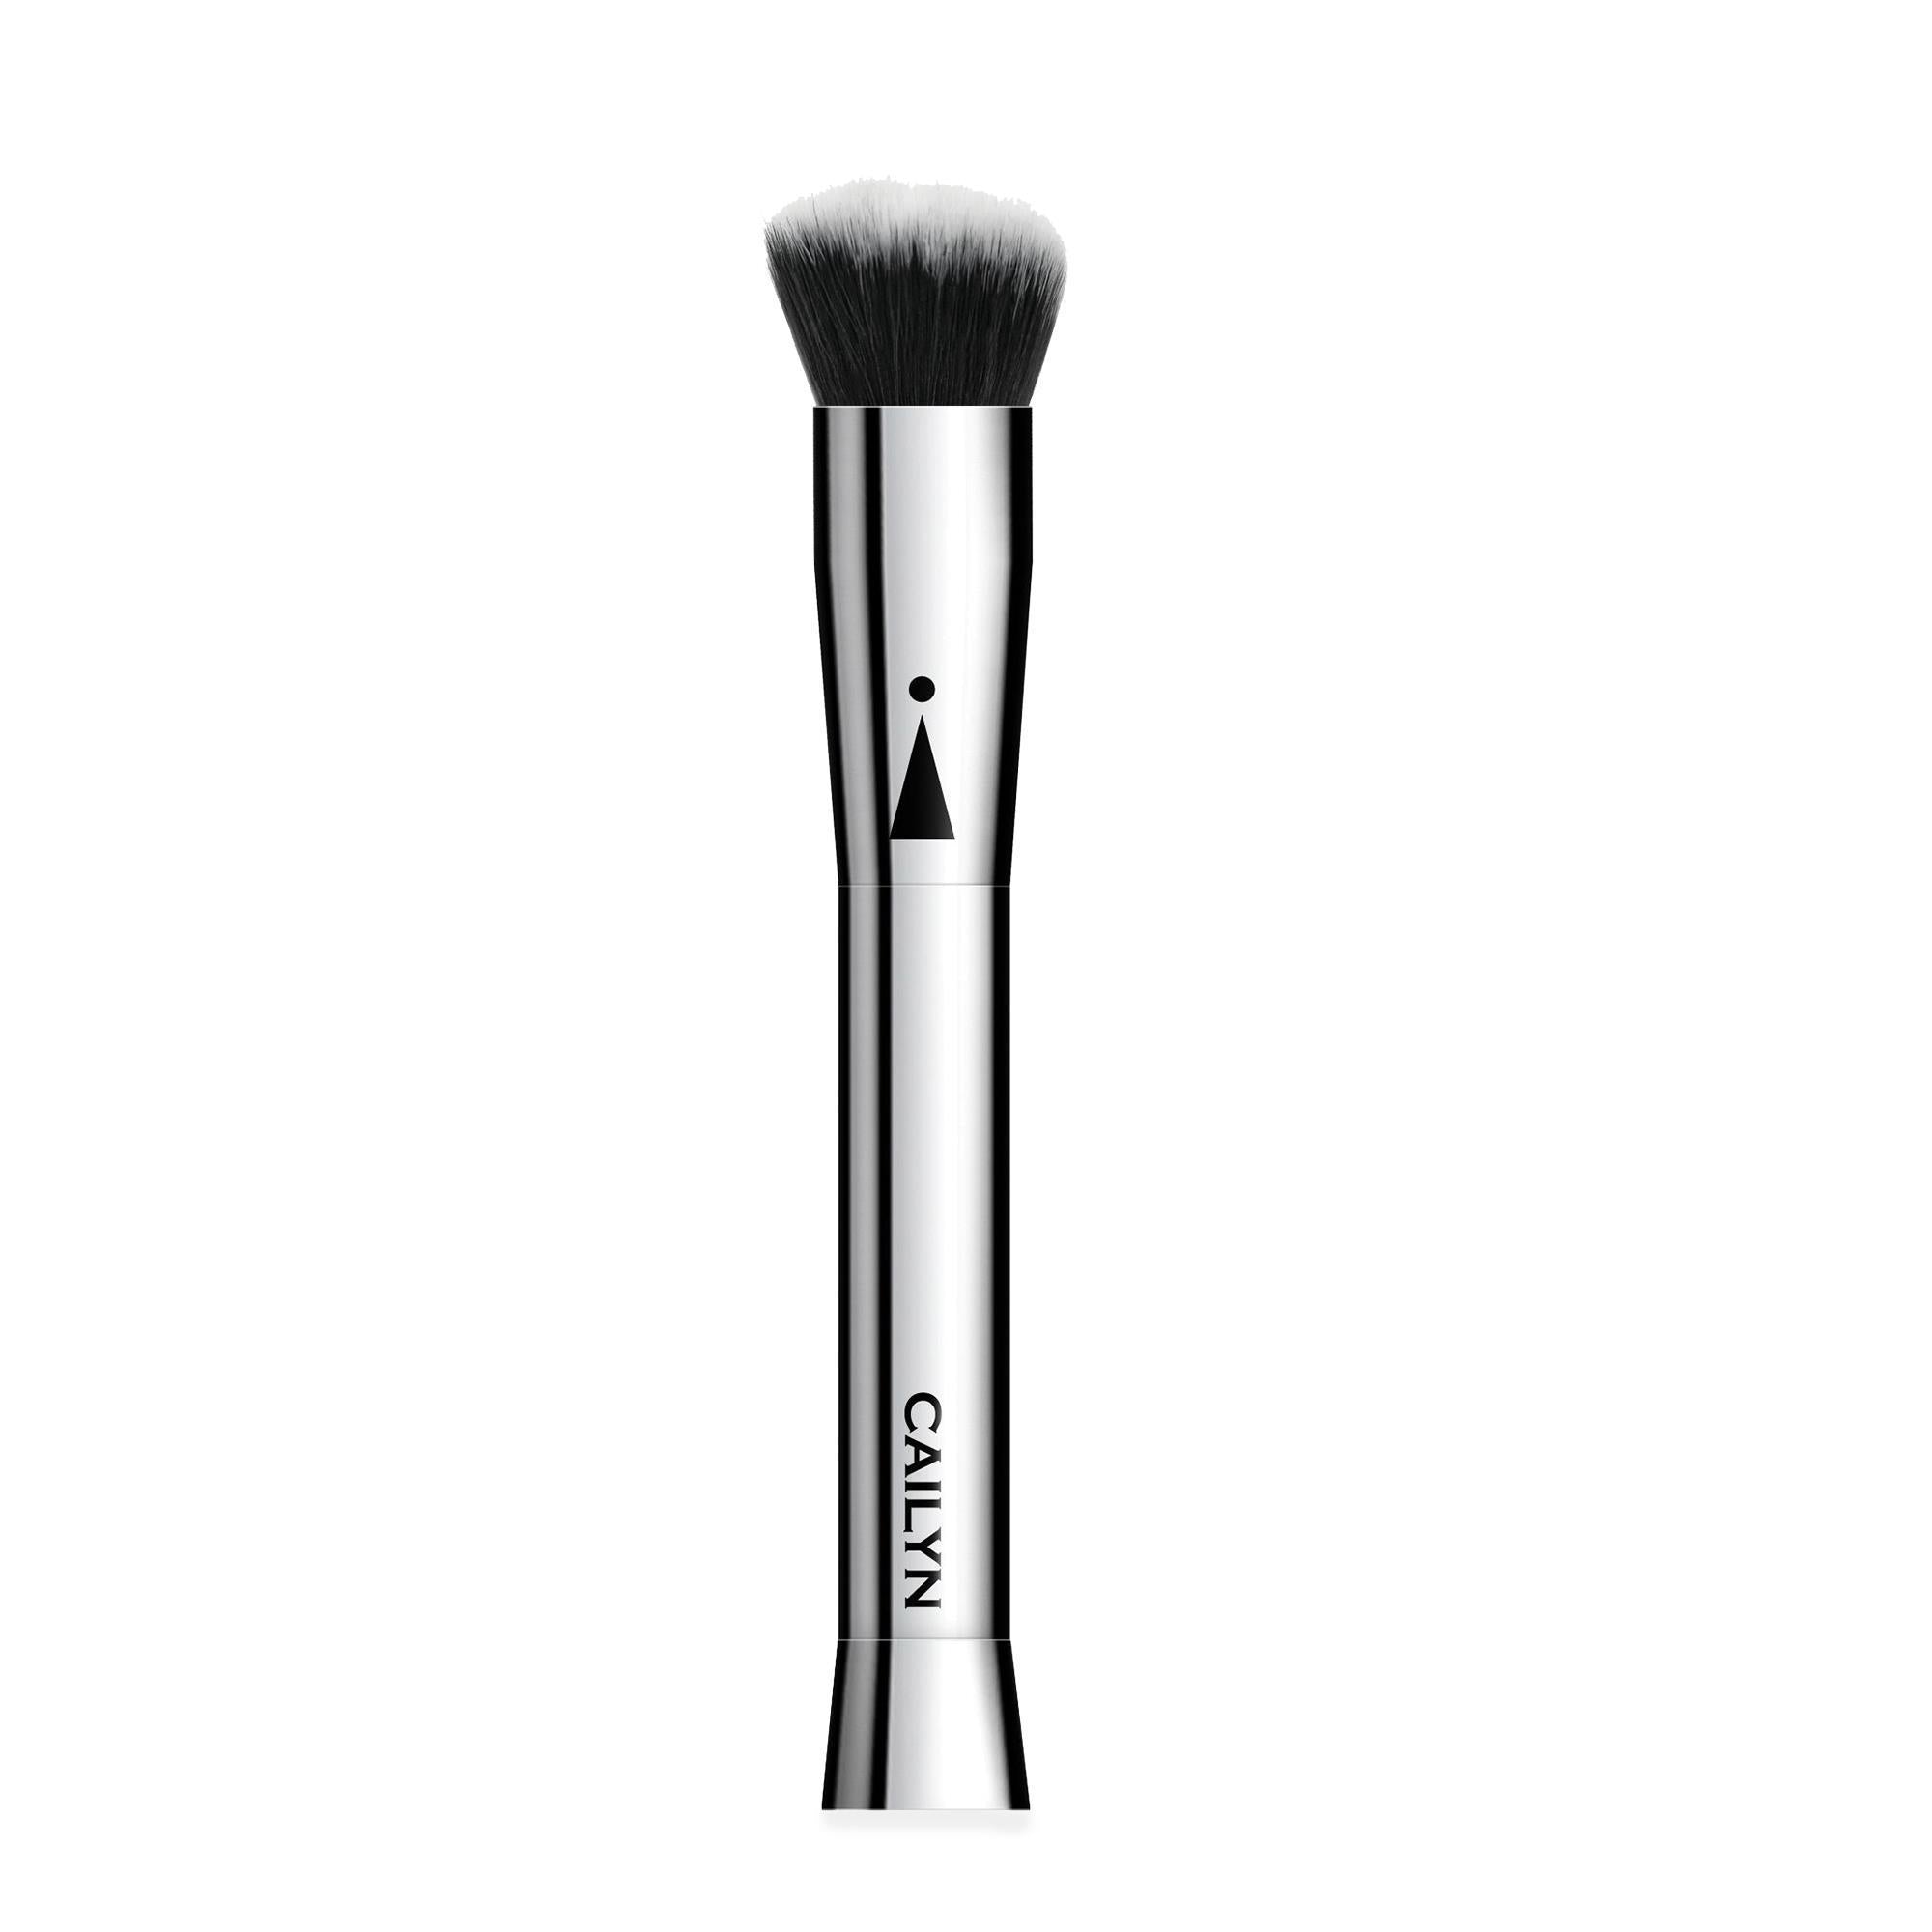 Brushes & Applicators Rounded Slant Cailyn Makeup Brushes